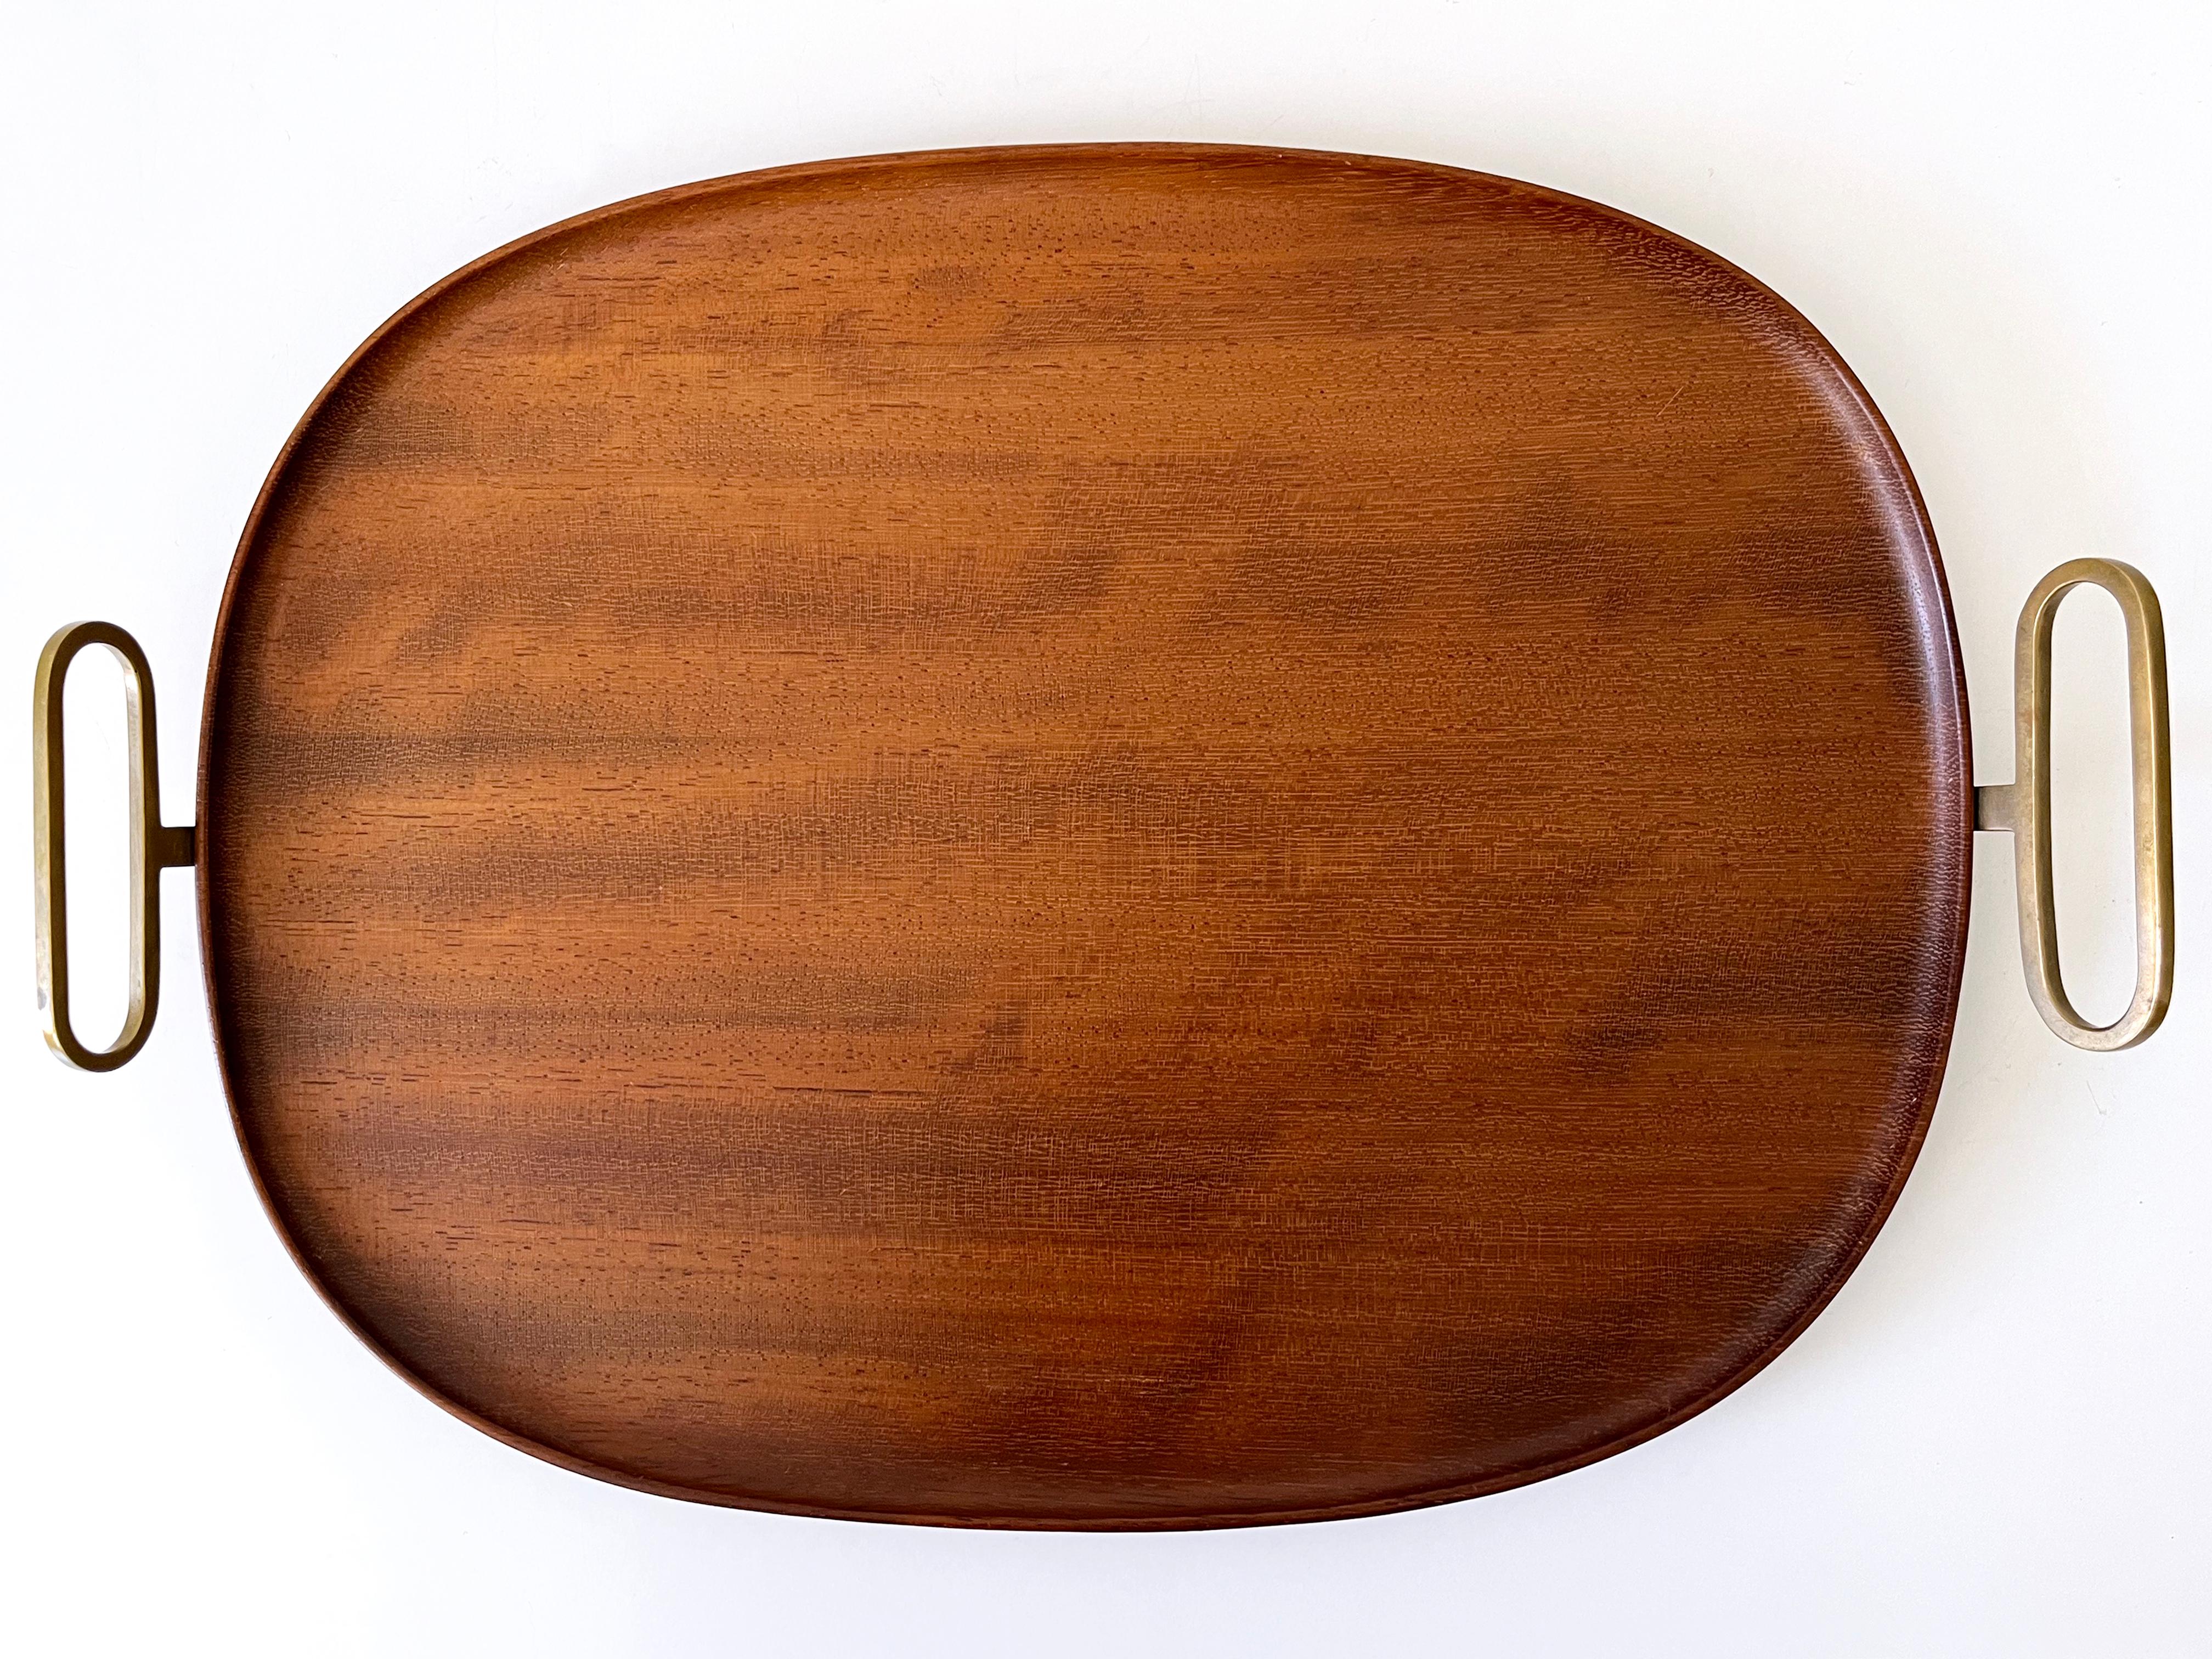 Mid-20th Century Extremely Rare Mid-Century Modern Teak Serving Tray by Carl Auböck Austria 1950s For Sale